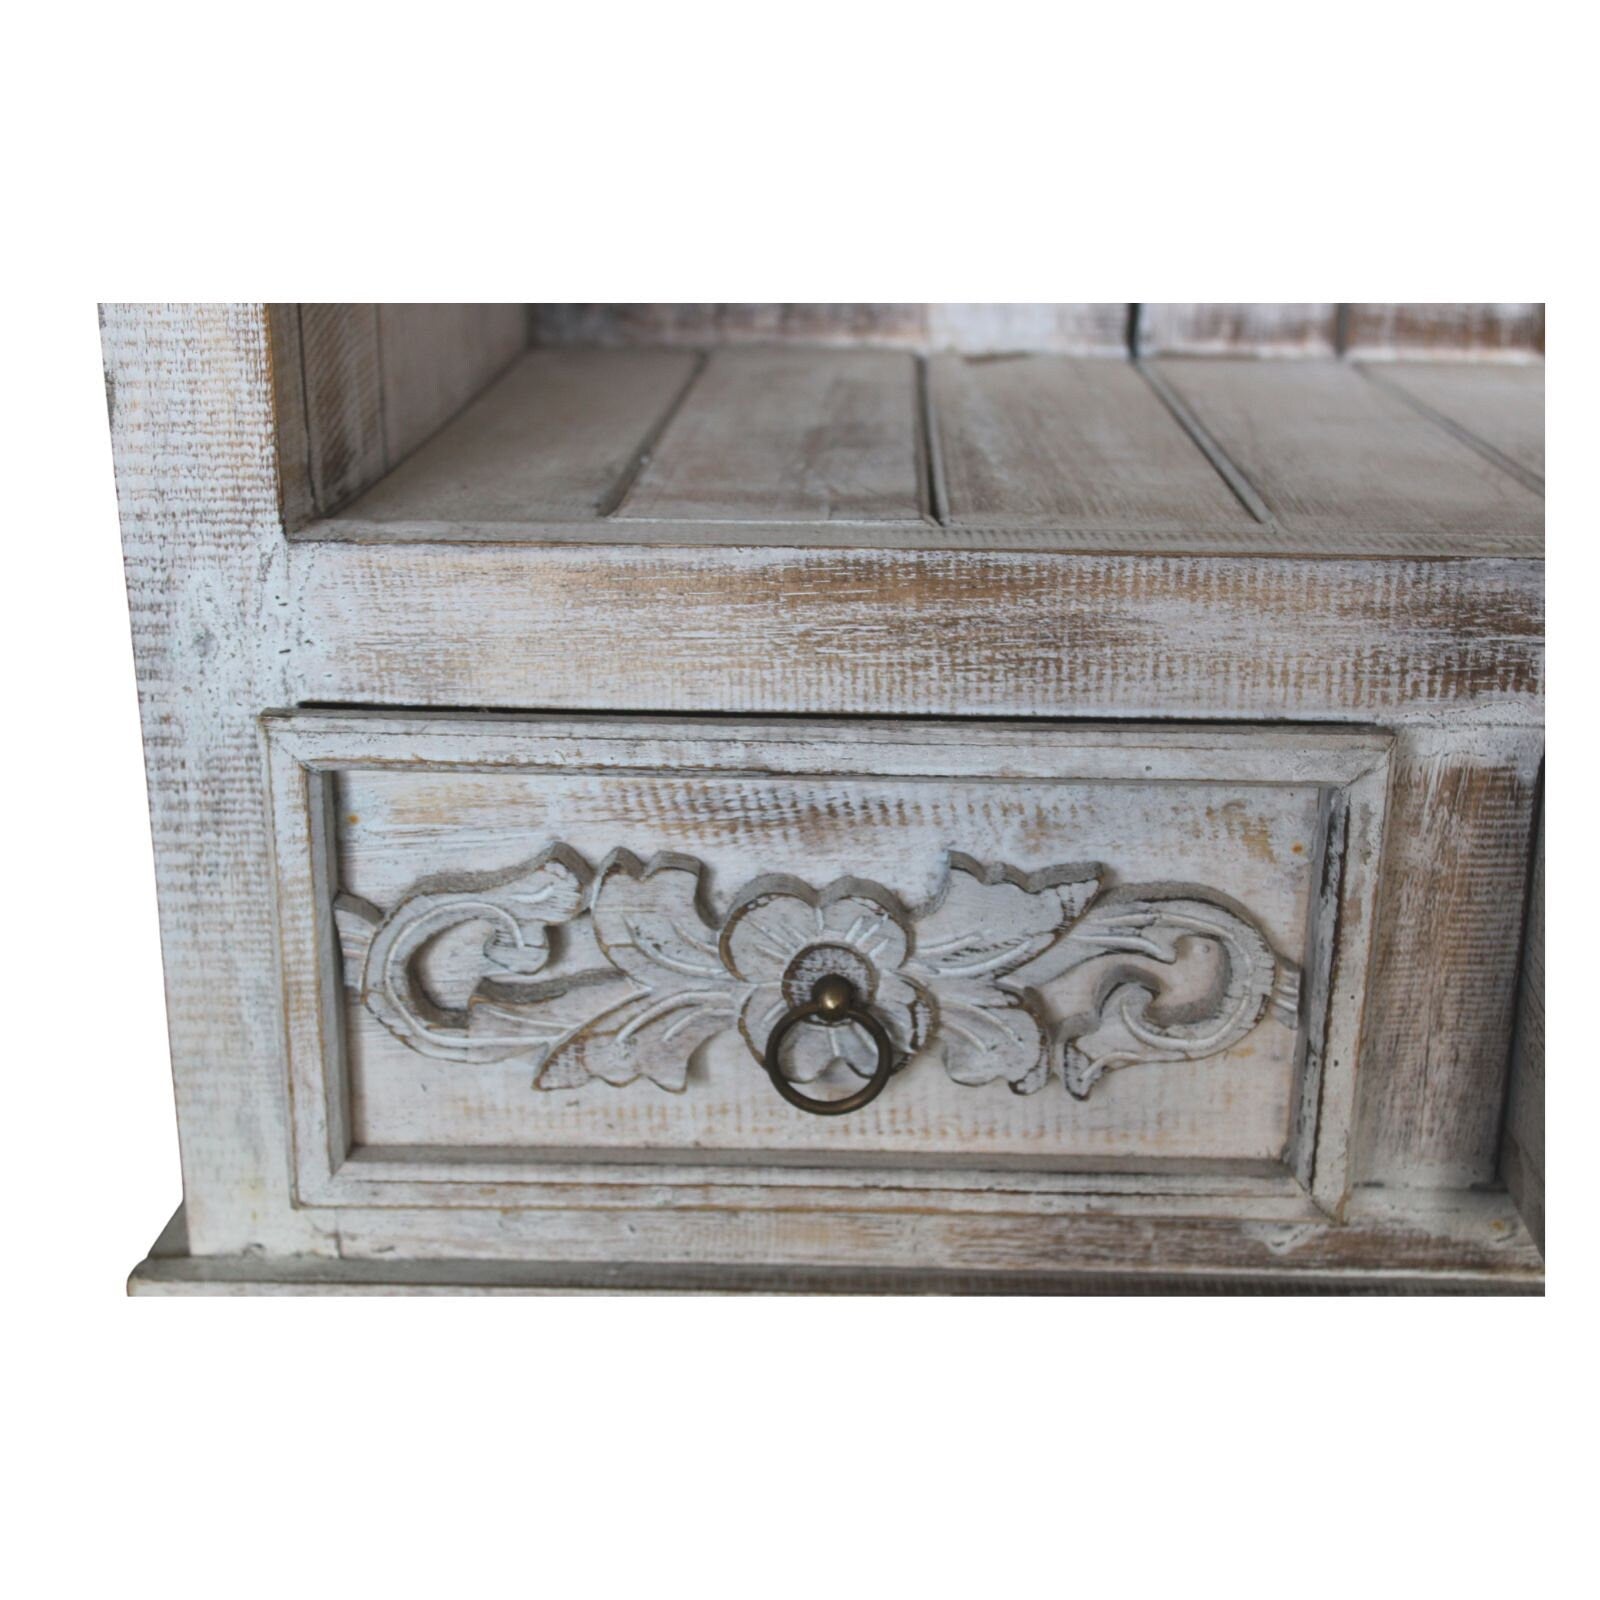 Albasia Bathroom Cabinets-whitewashed hand carved, exquisite detailing-oerfect for any room-Dimensions: H - 120cm; W - 66.7cm; D - 40cm. Wonkey Donkey Bazaar